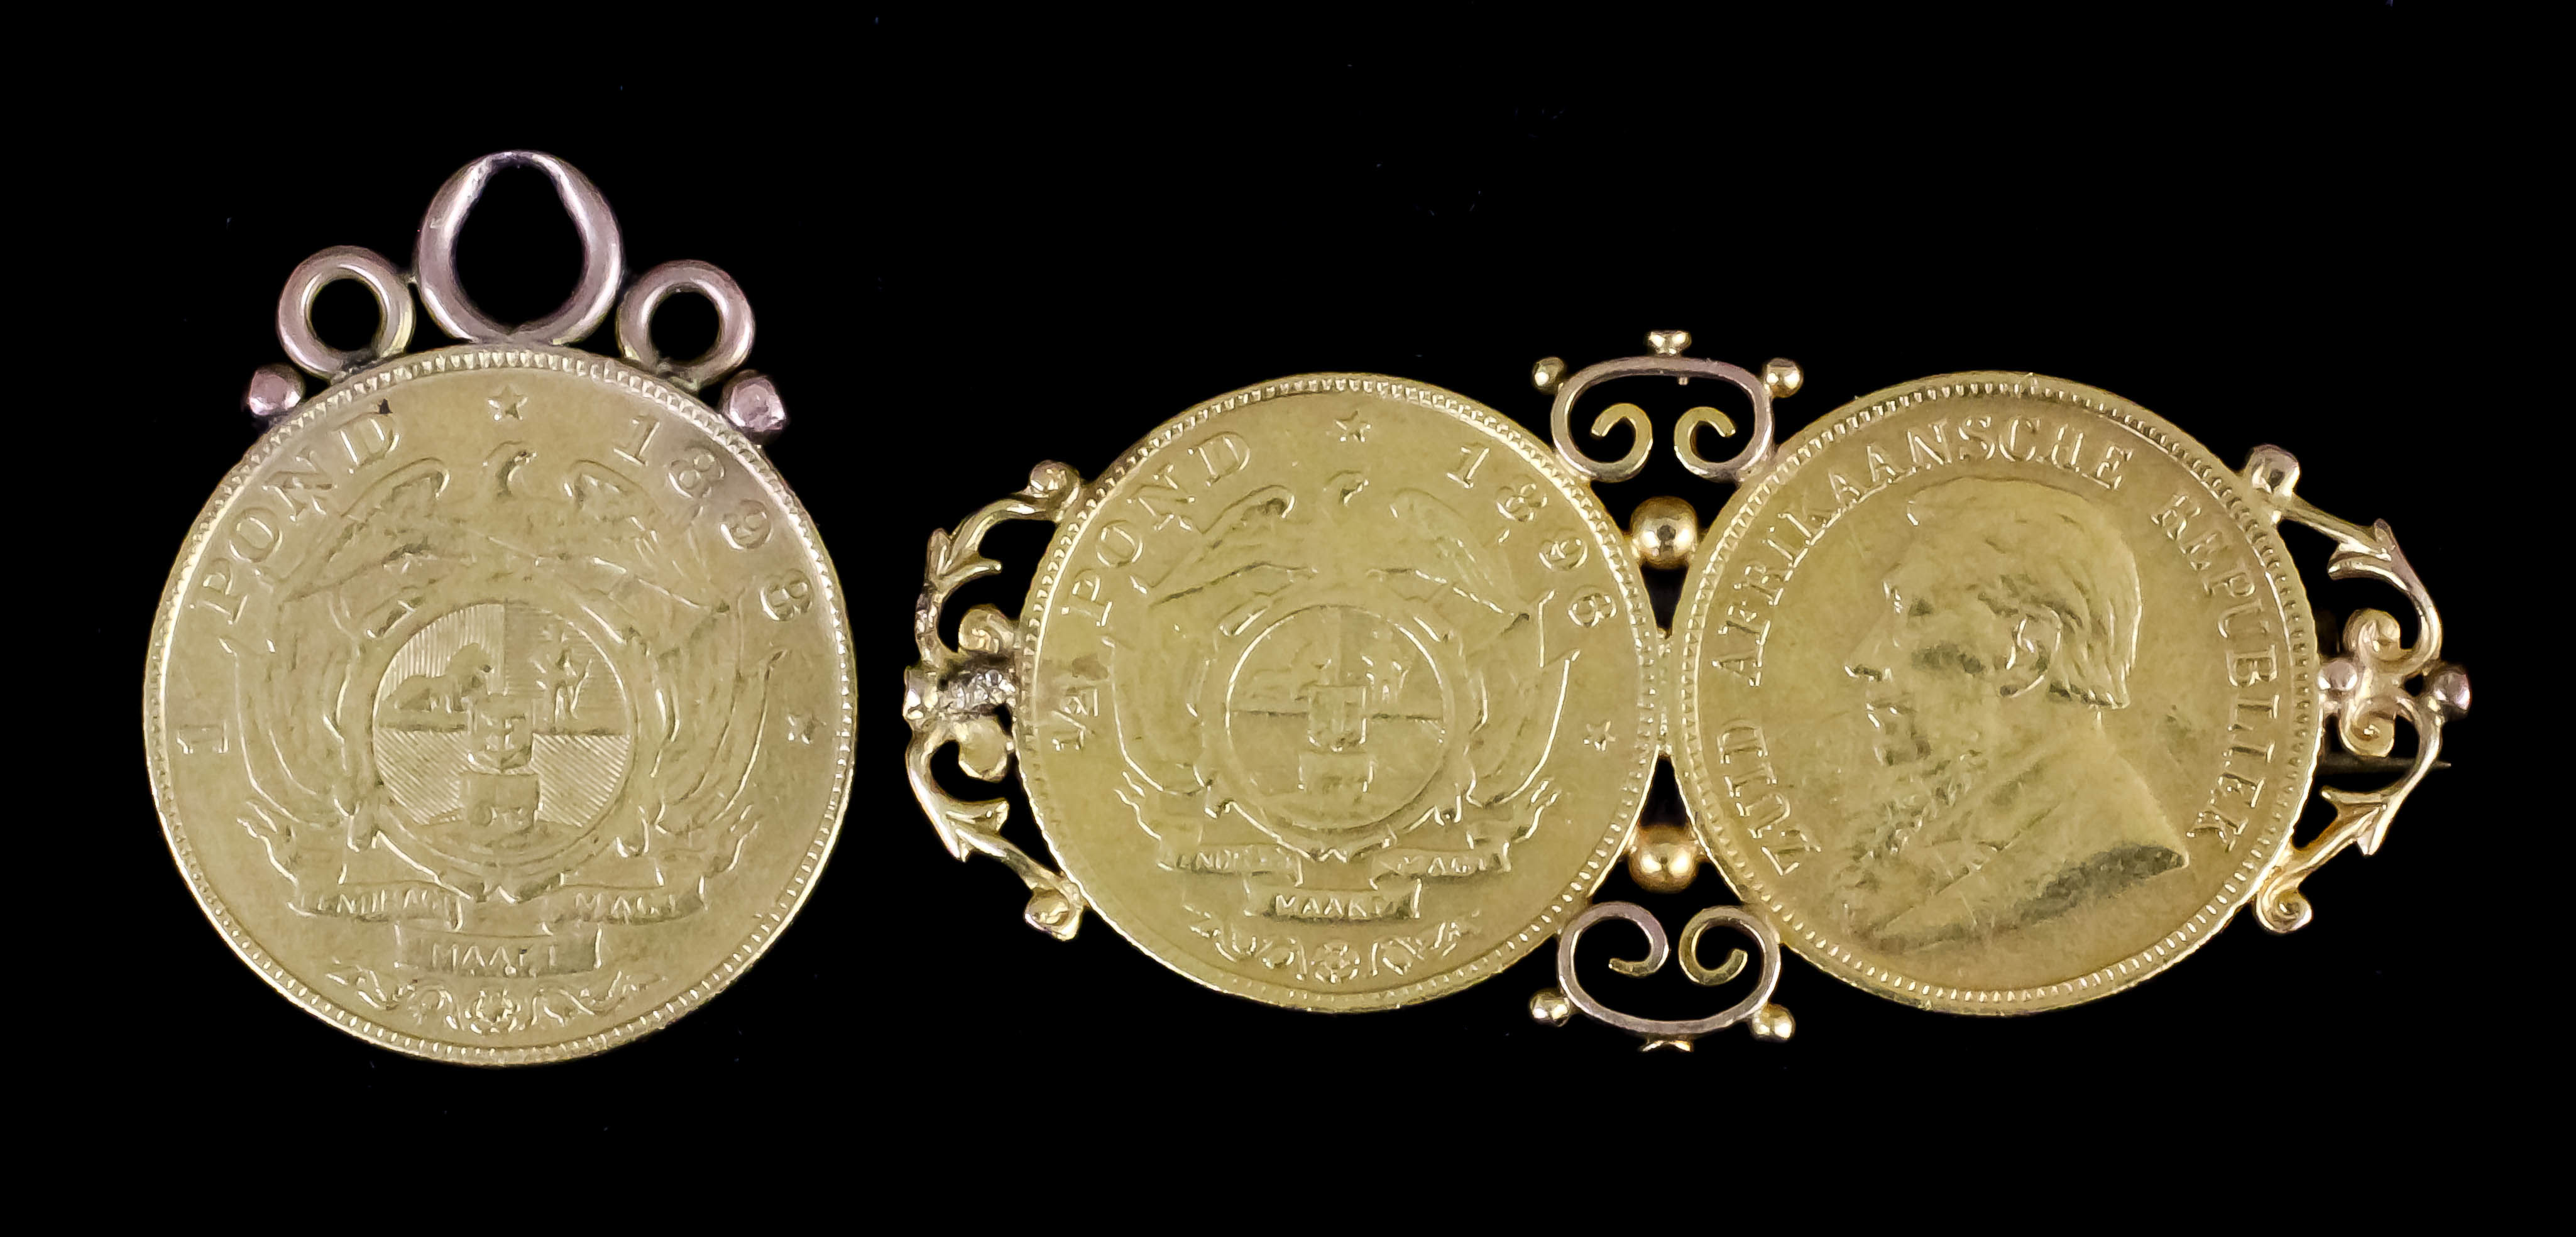 A South African 1898 gold One Pond coin with attached pendant mount, and two South African 1898 Half